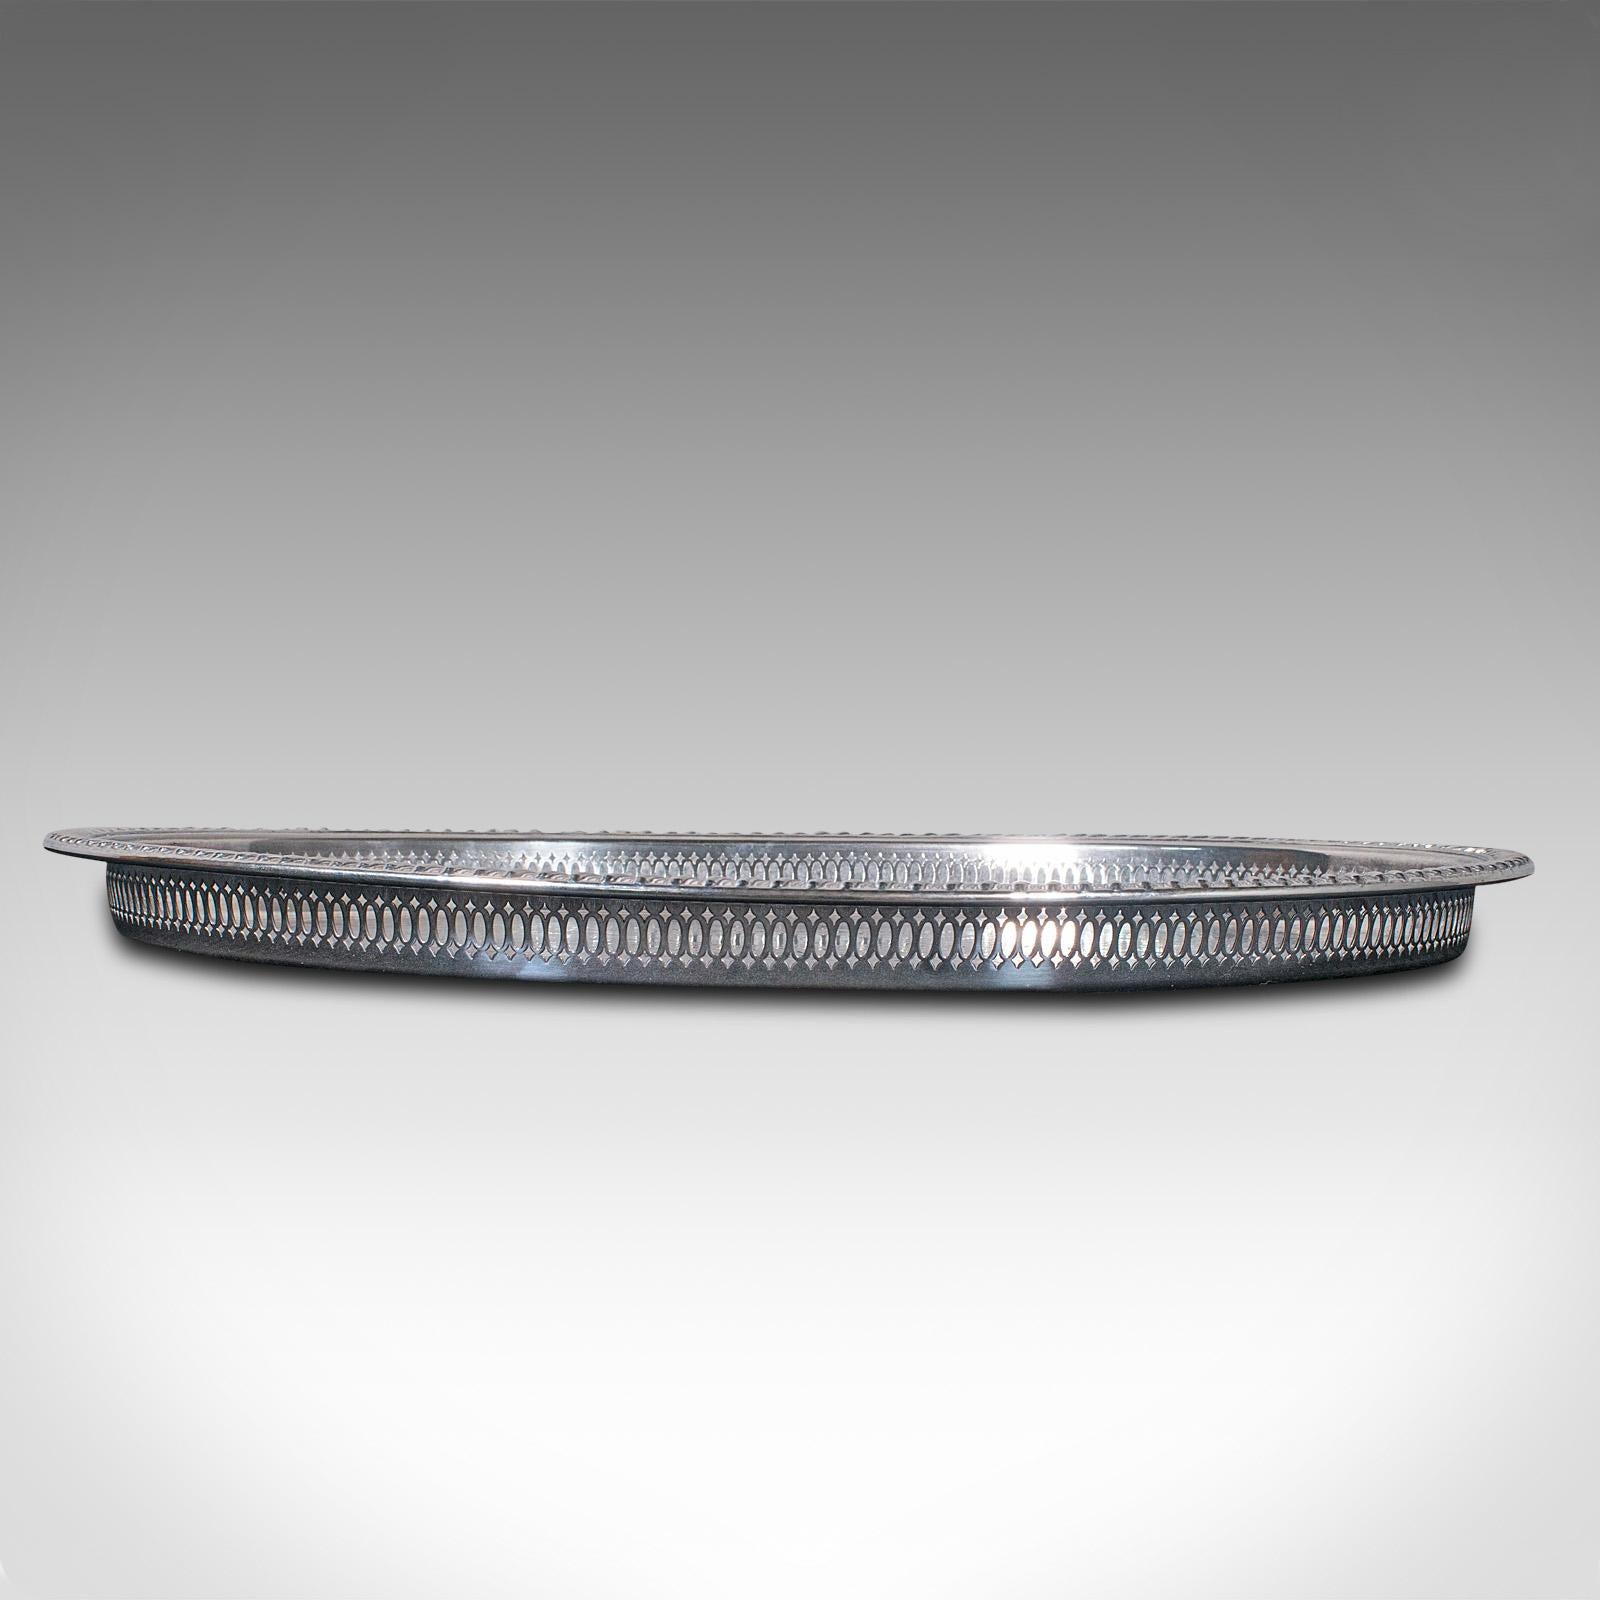 This is a vintage oval serving tray. An English, silver plated afternoon tea platter, dating to the mid 20th century, circa 1950.

Profusely detailed and ornate in appearance
Displays a desirable aged patina throughout
Bright silver plate